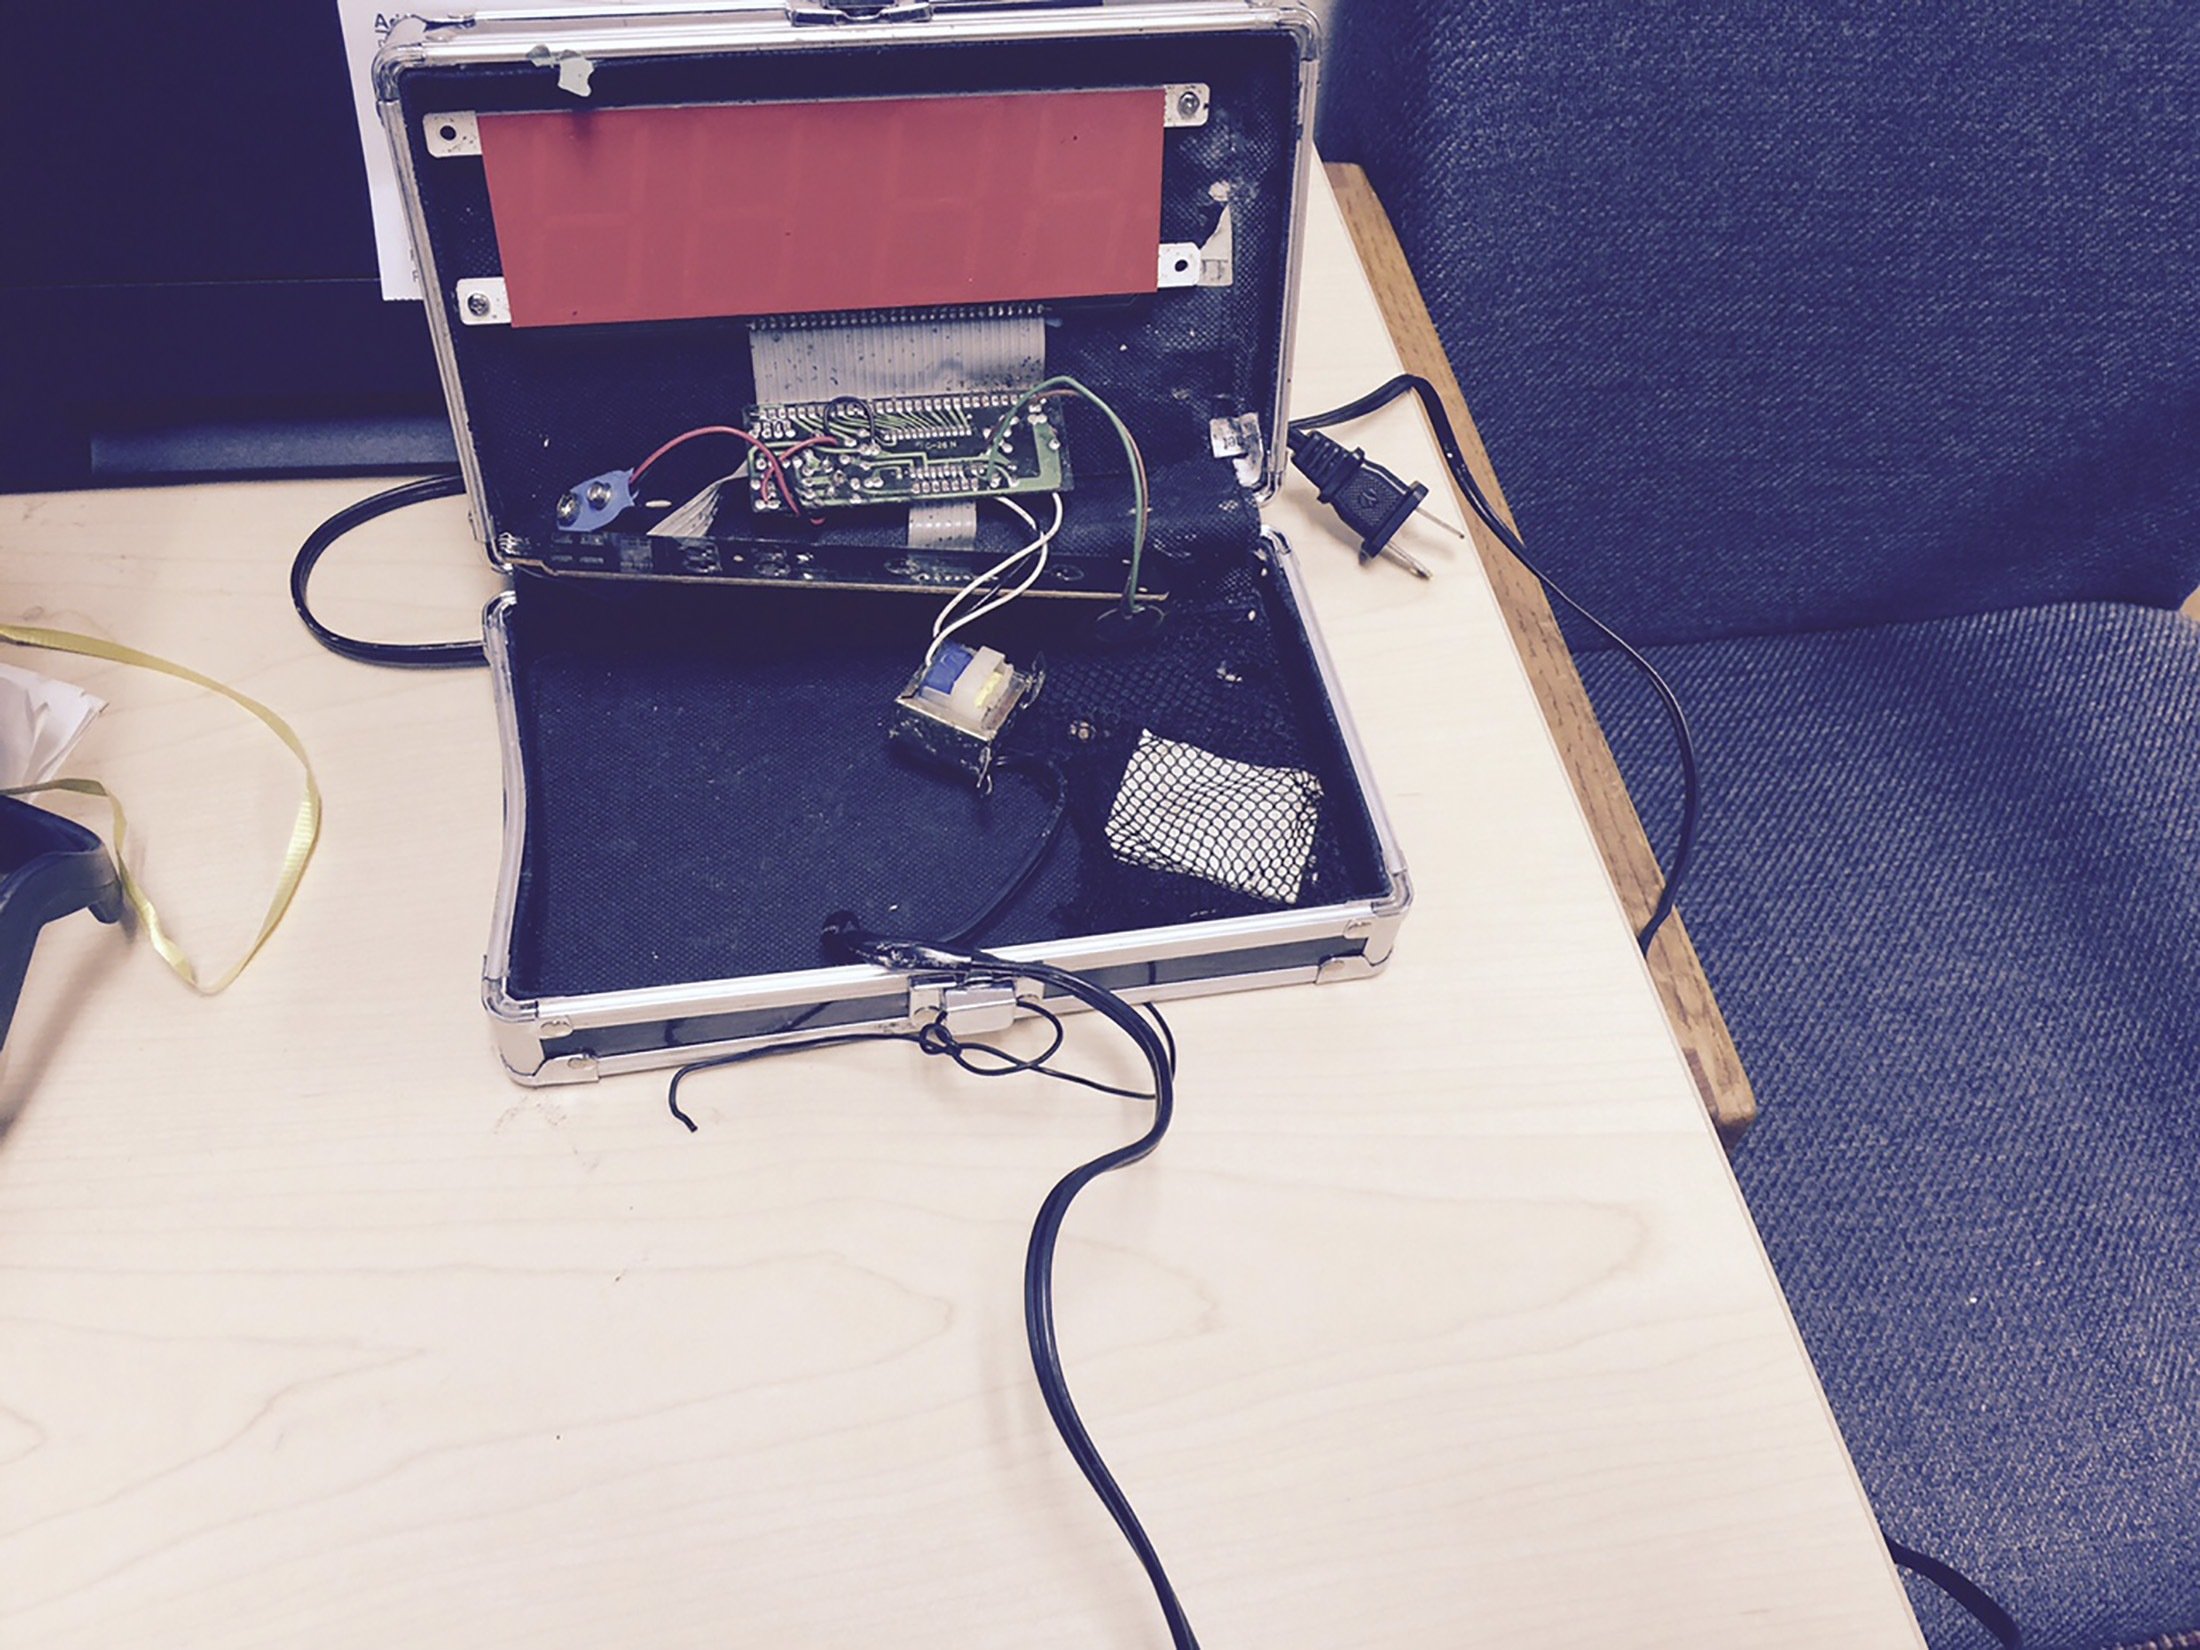 A homemade clock made by Ahmed Mohamed is seen in an undated picture released by the Irving Texas Police Department